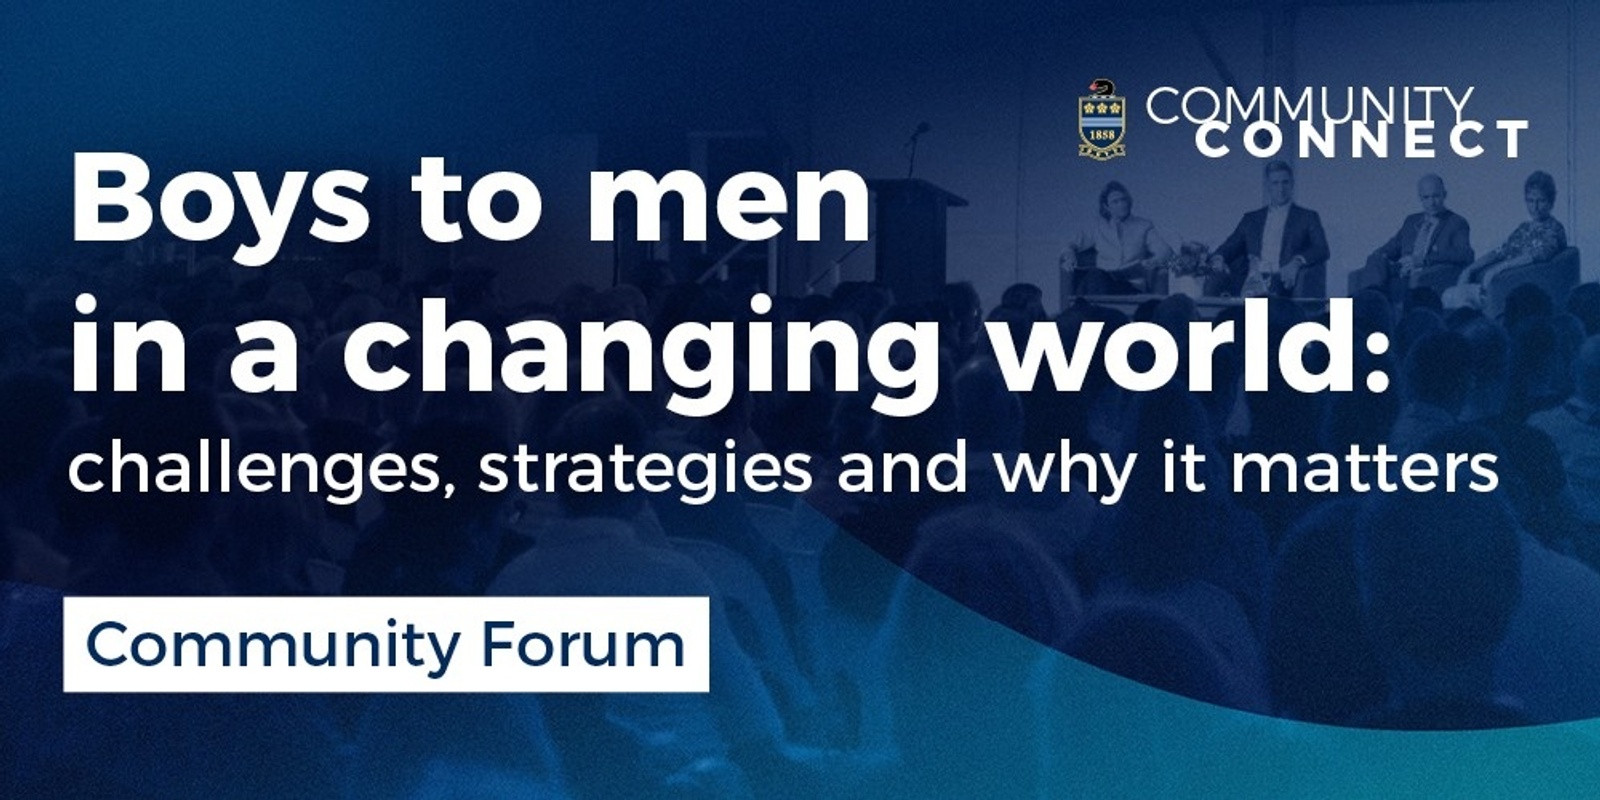 Banner image for Community Forum - Boys to men in a changing world: challenges, strategies and why it matters.